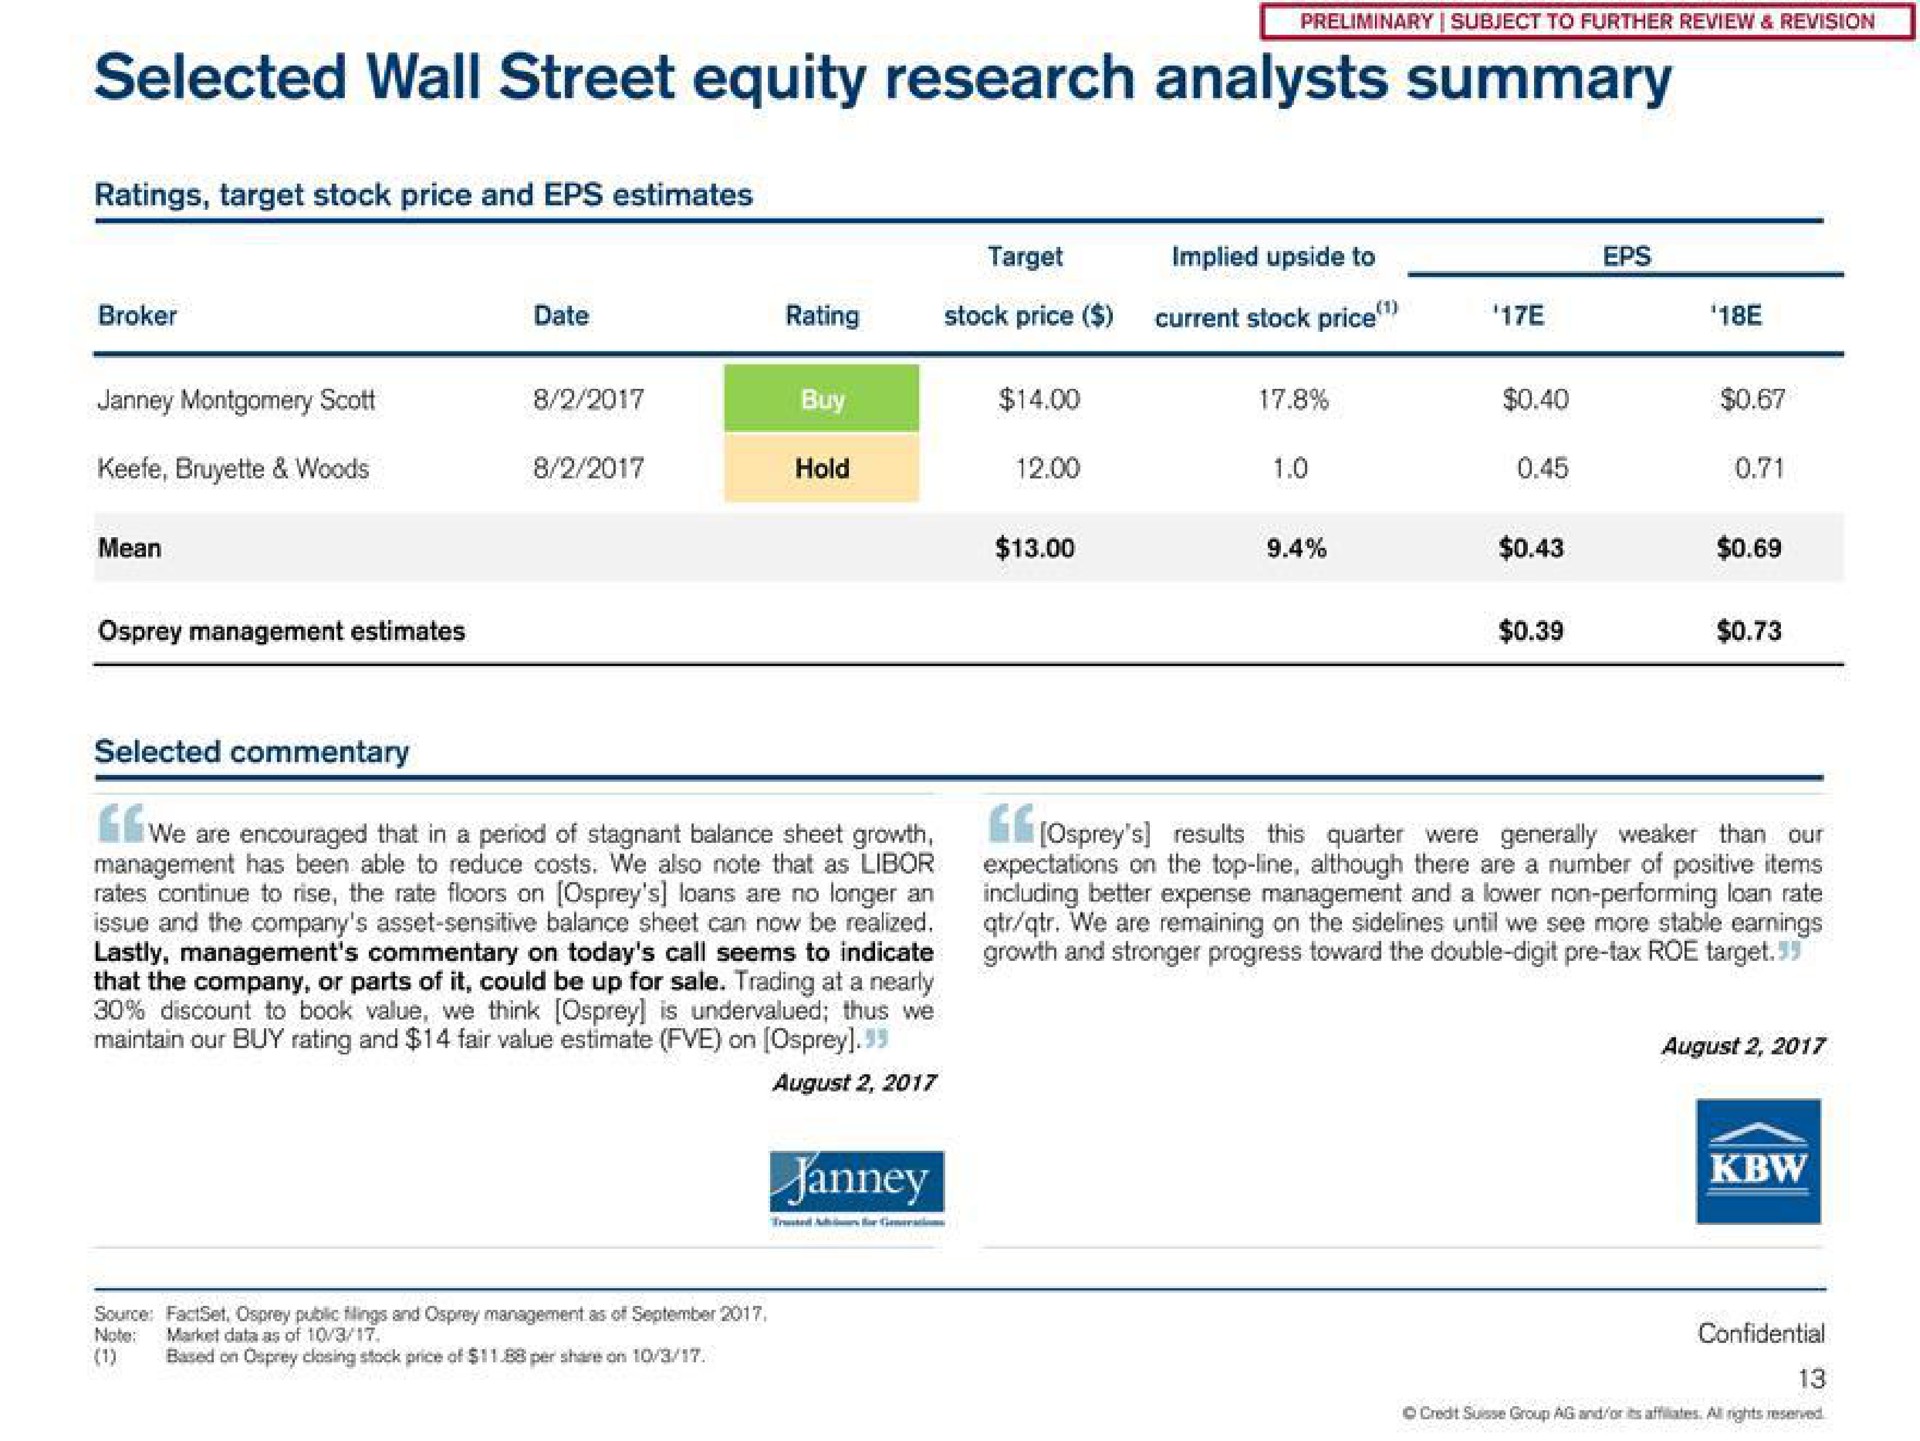 selected wall street equity research analysts summary | Credit Suisse